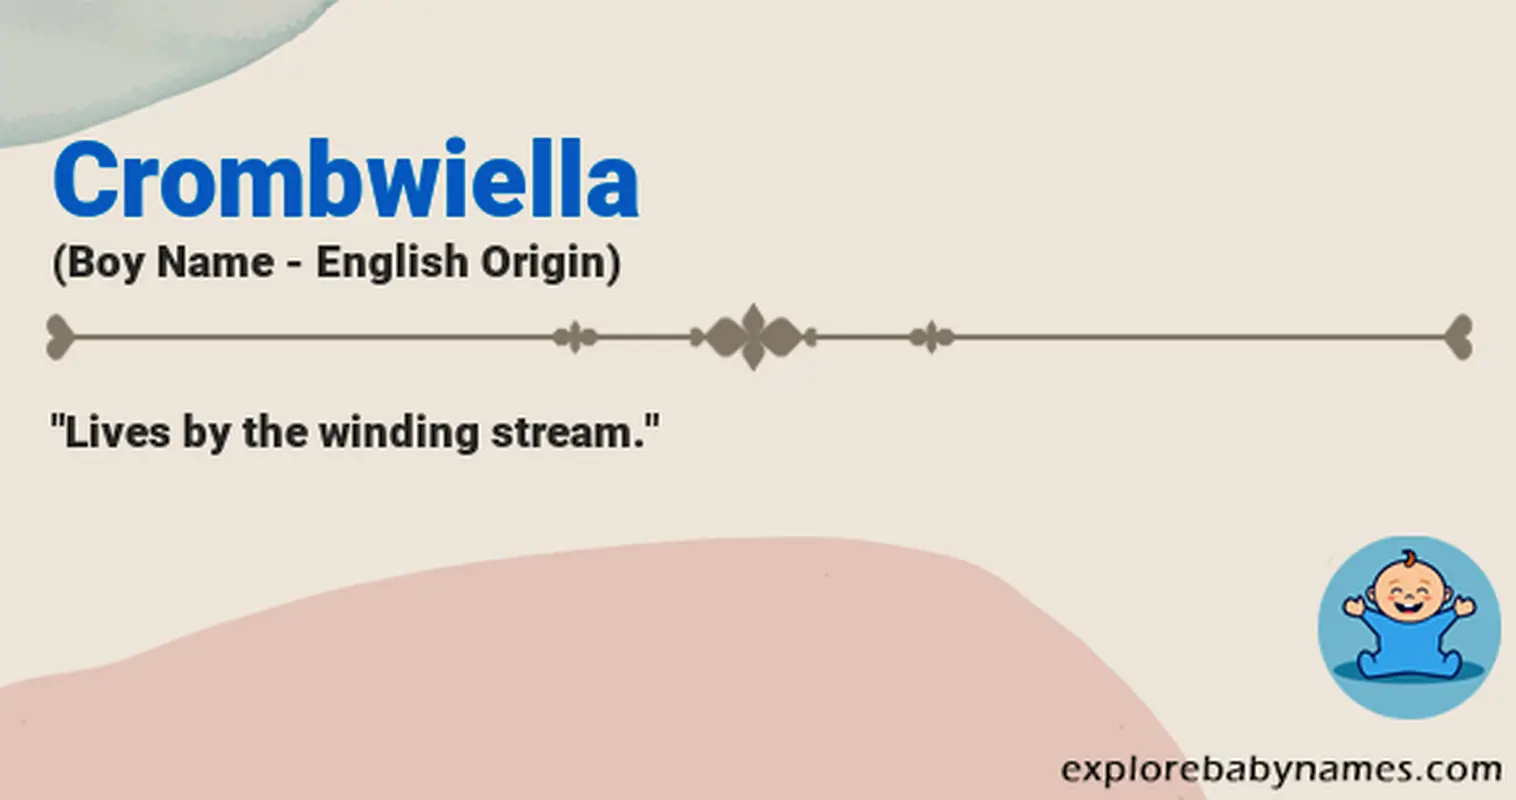 Meaning of Crombwiella